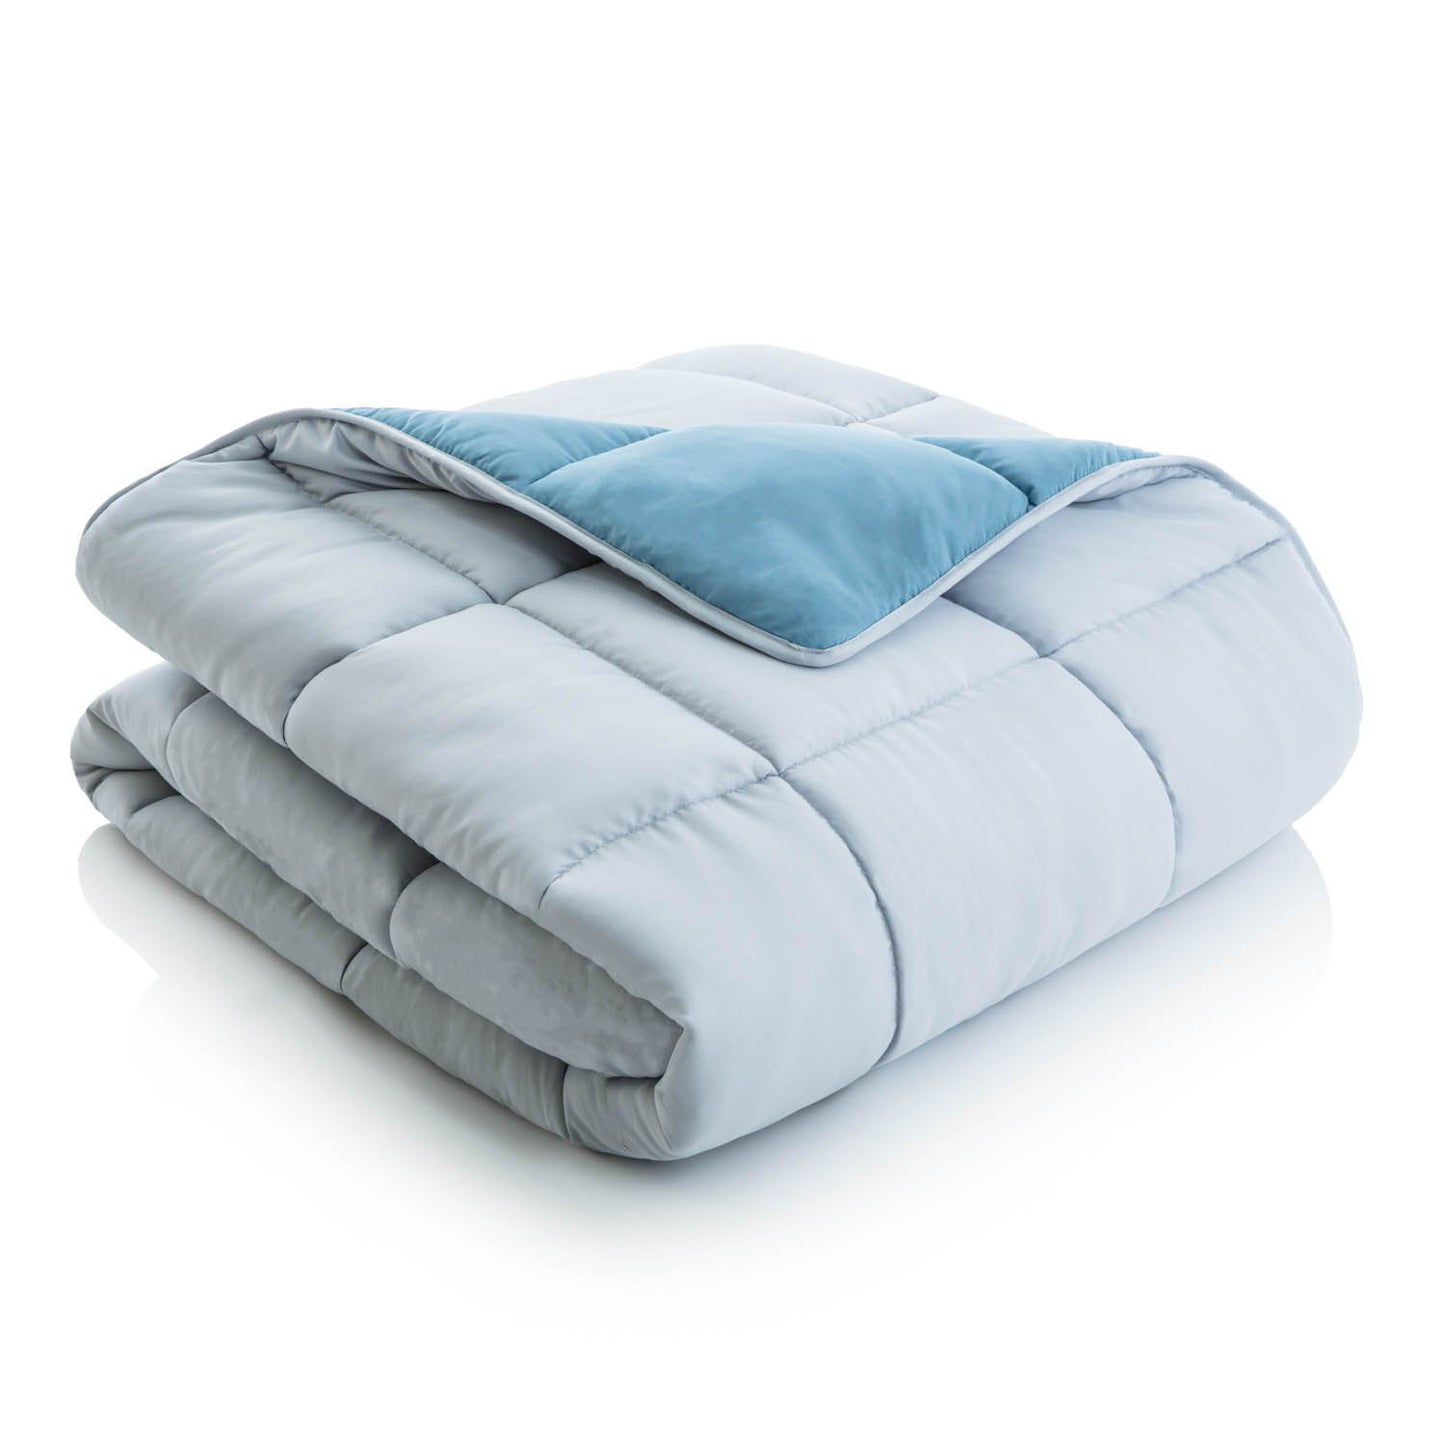 Reversible Bed In A Bag - California King - White